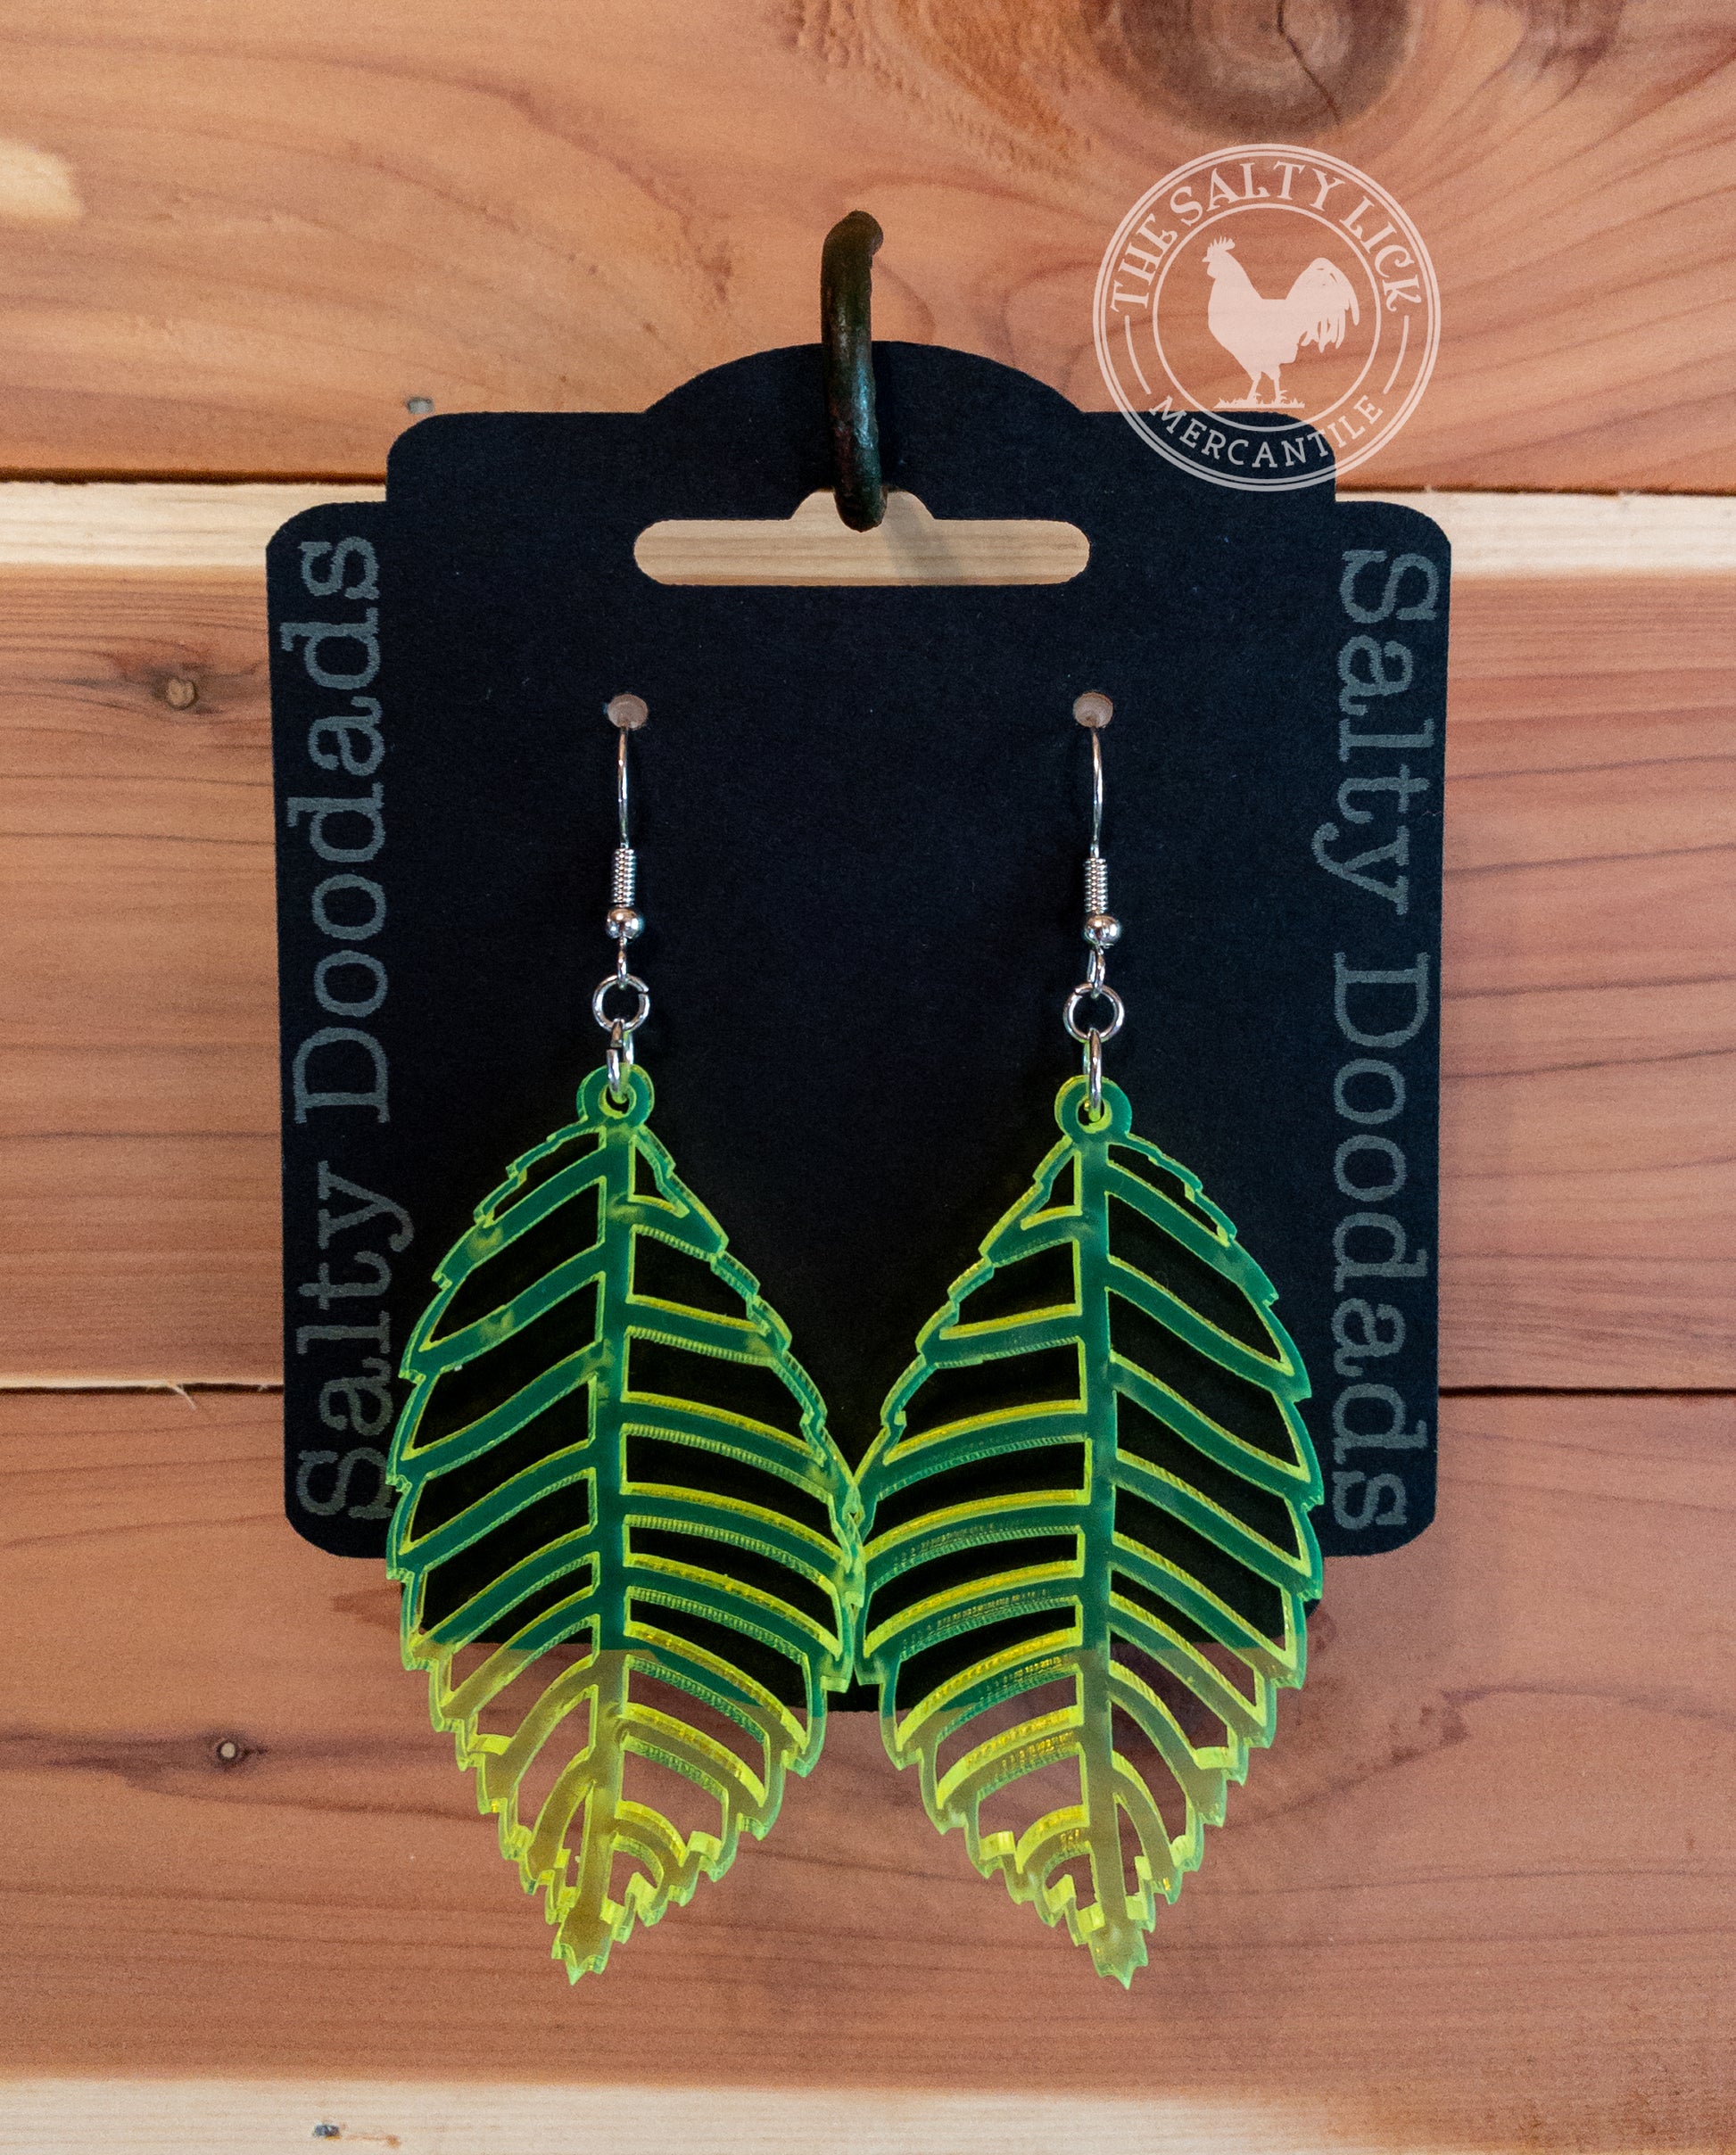 Translucent Neon Leaf Dangle Earrings - The Salty Lick Mercantile